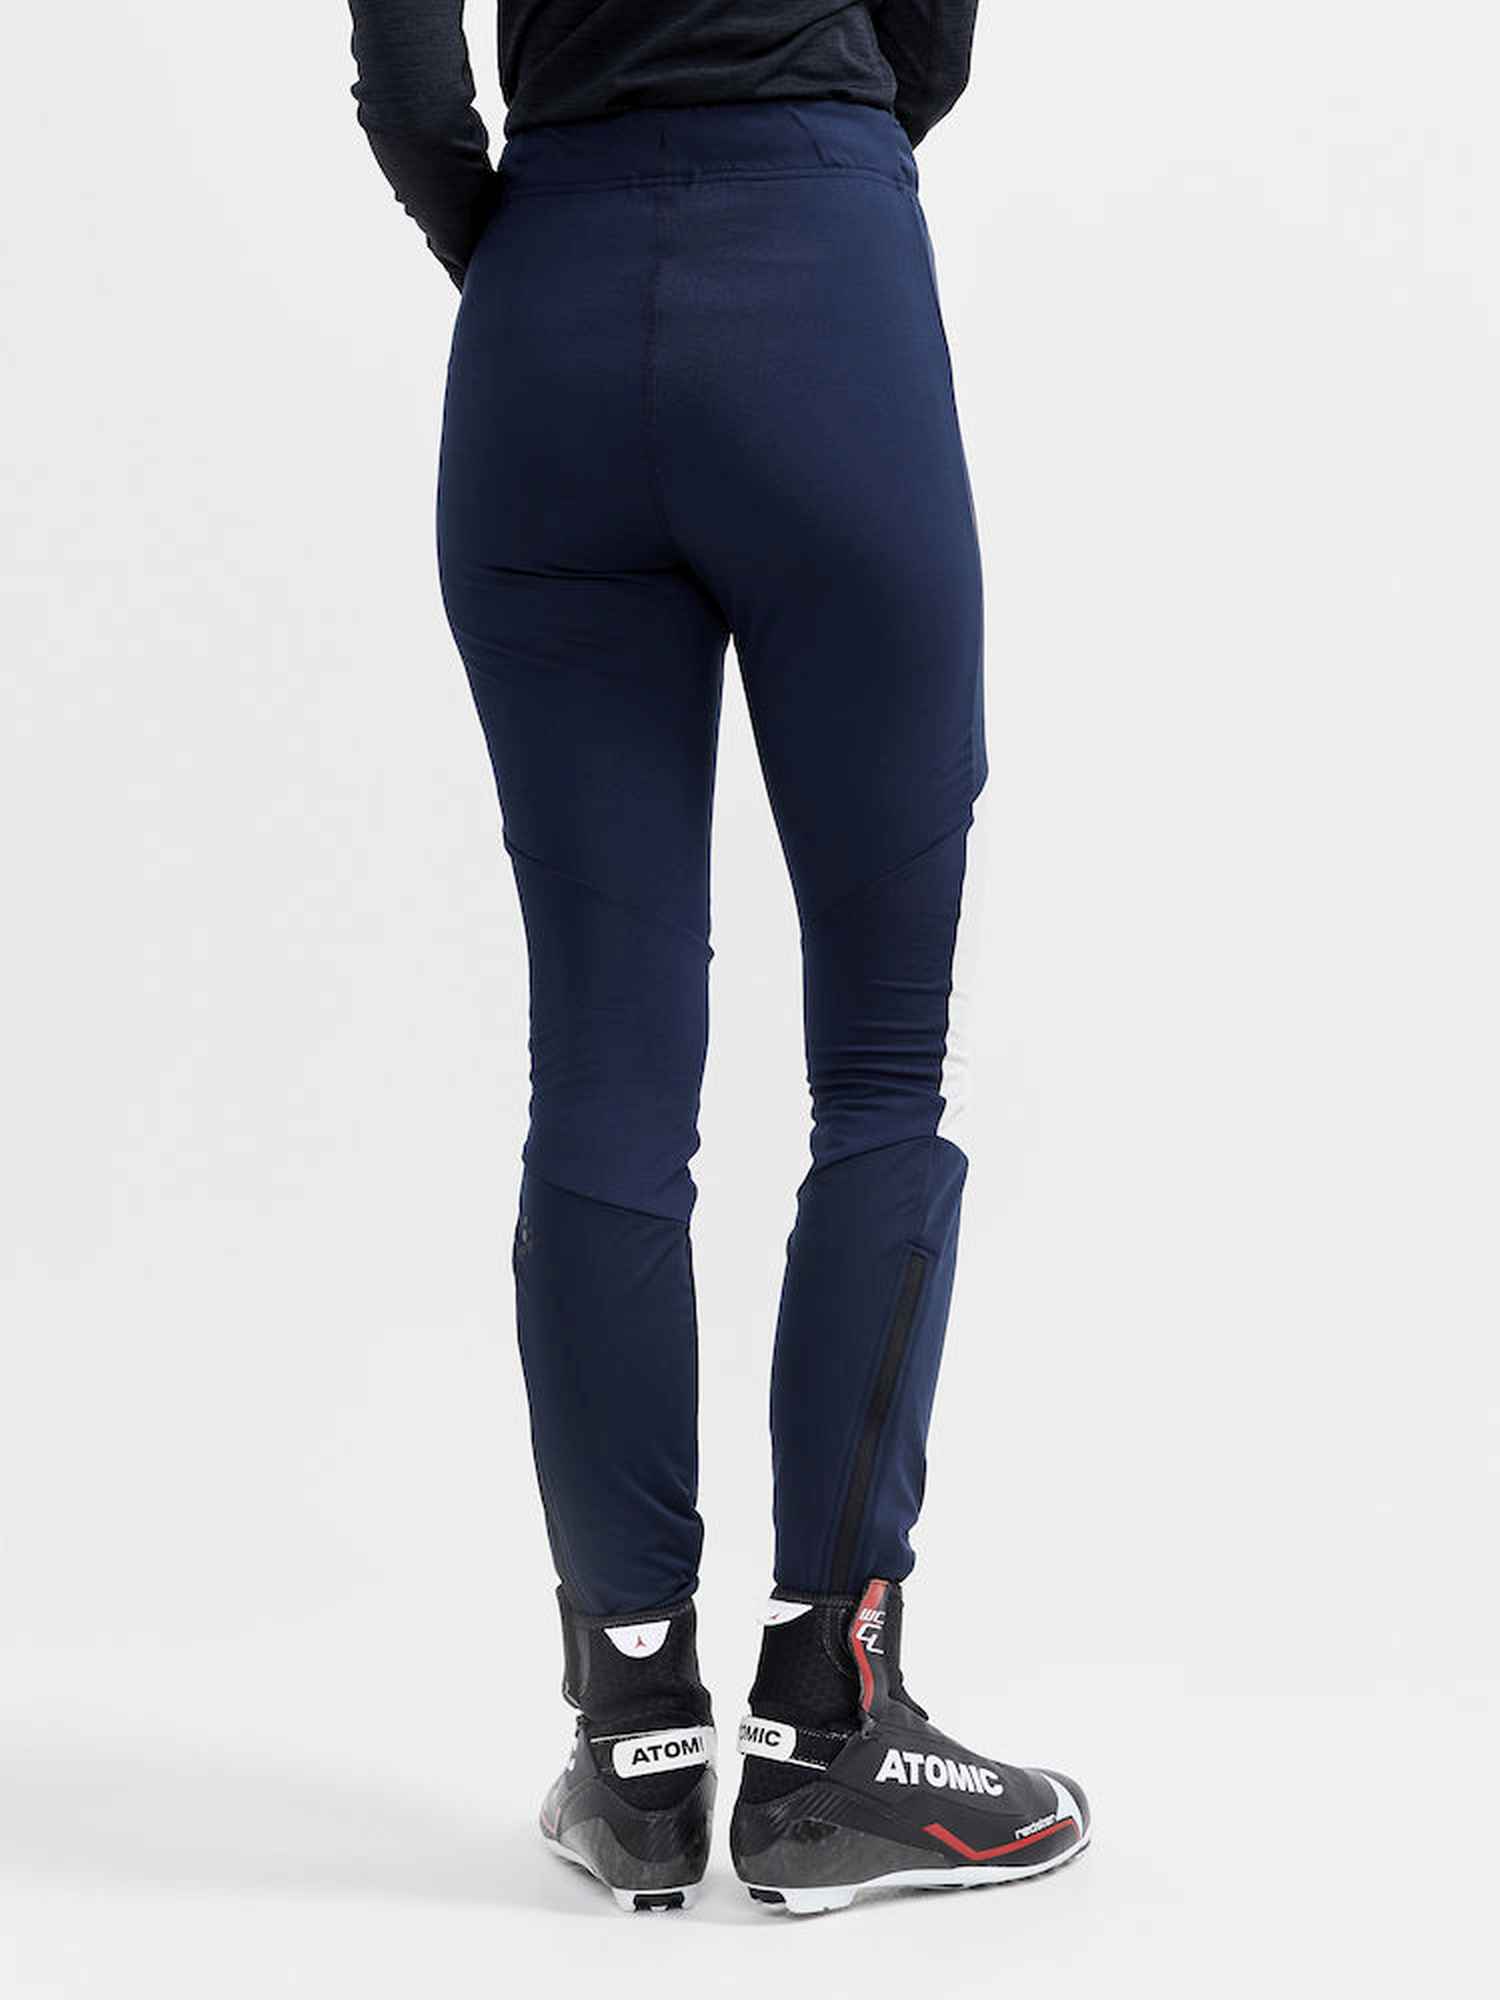 Women's insulated softshell pants